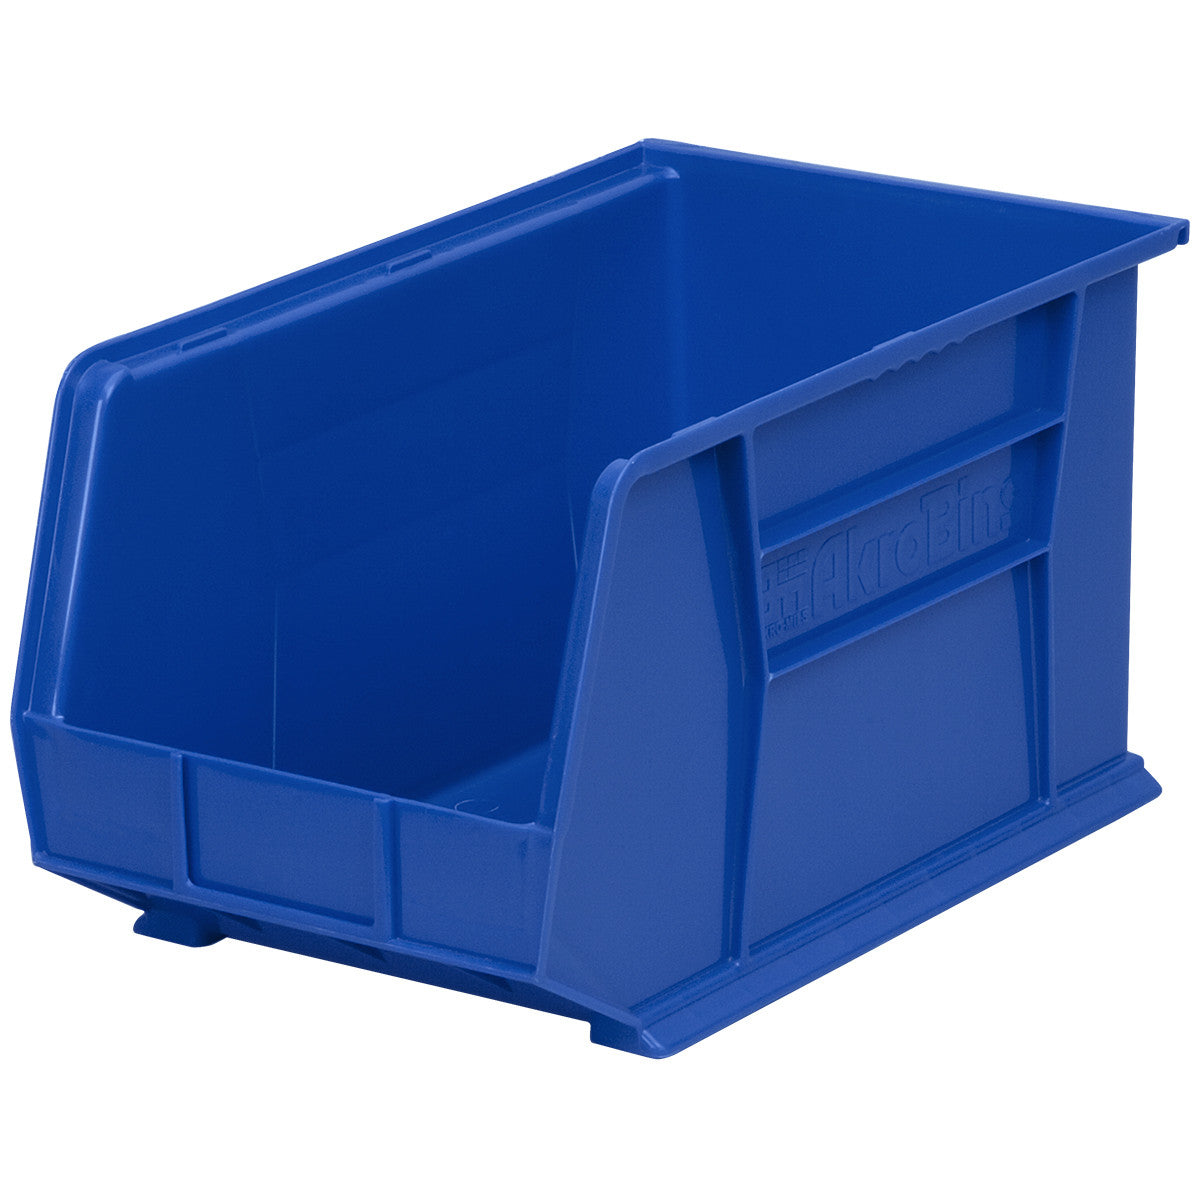 SHELF BIN UNITS -- COMPLETE PACKAGES at Material Handling Solutions Llc